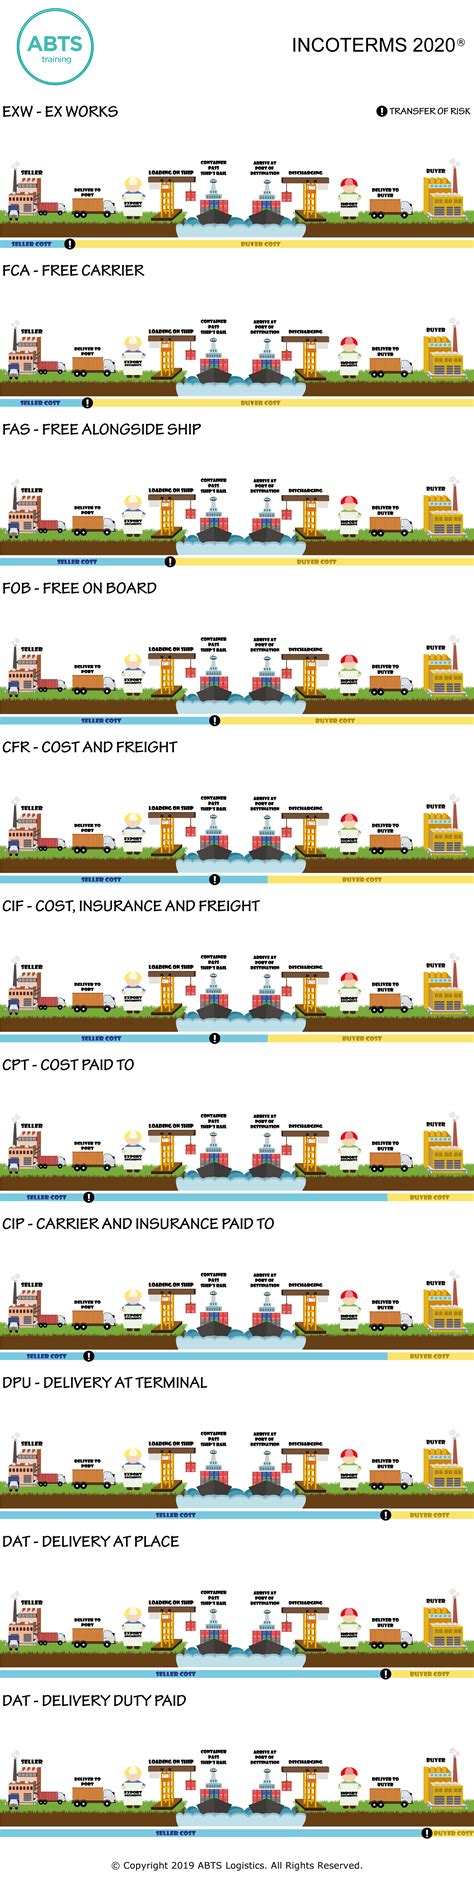 Incoterms Explained Think Code Words For Logistics